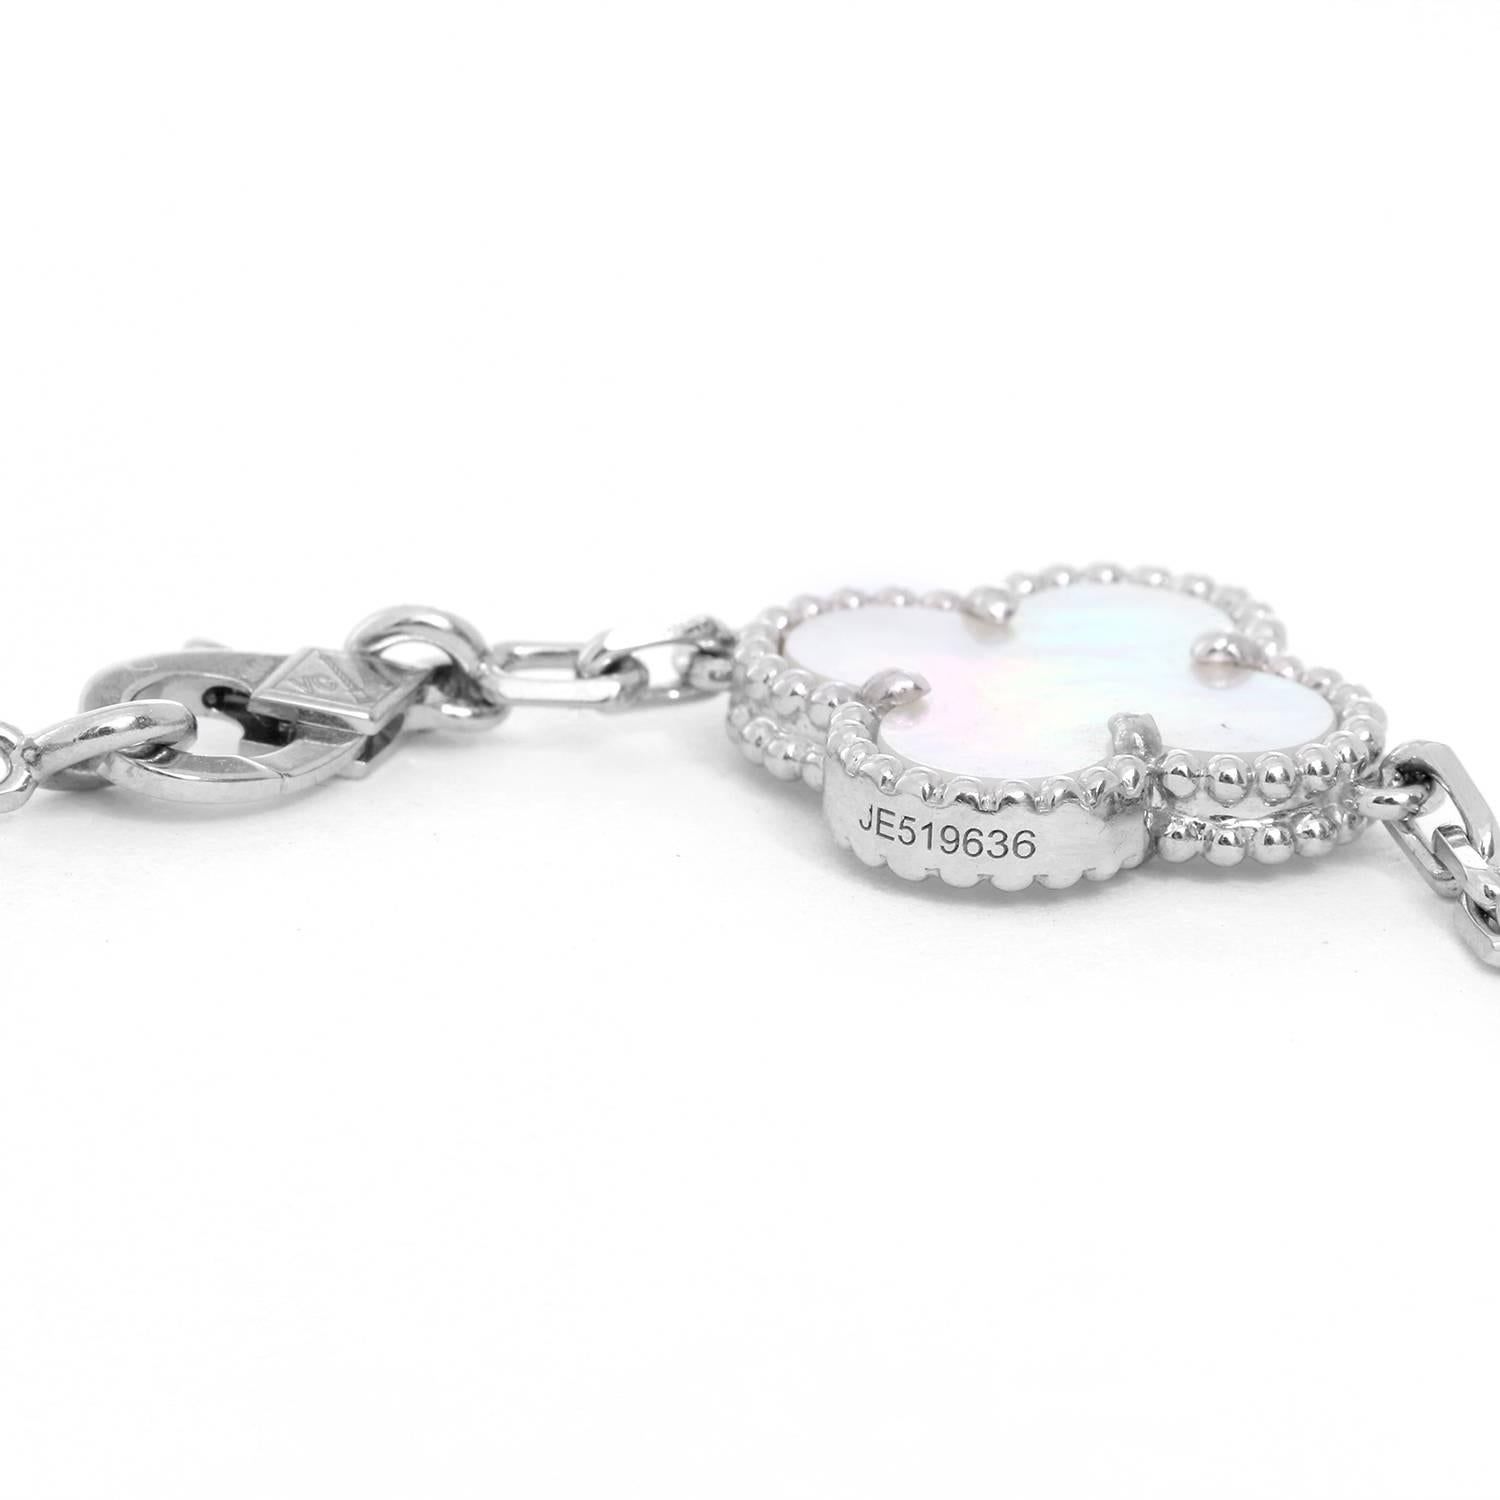 Van Cleef & Arpels Vintage Alhambra White Gold Mother of Pearl Bracelet -  Vintage Alhambra White Gold, 5 motif Mother of Pearl Bracelet. Hallmark, designers mark. Wrist size 7.2 inches. Pre-owned with Van Cleef & Arpels box and papers.